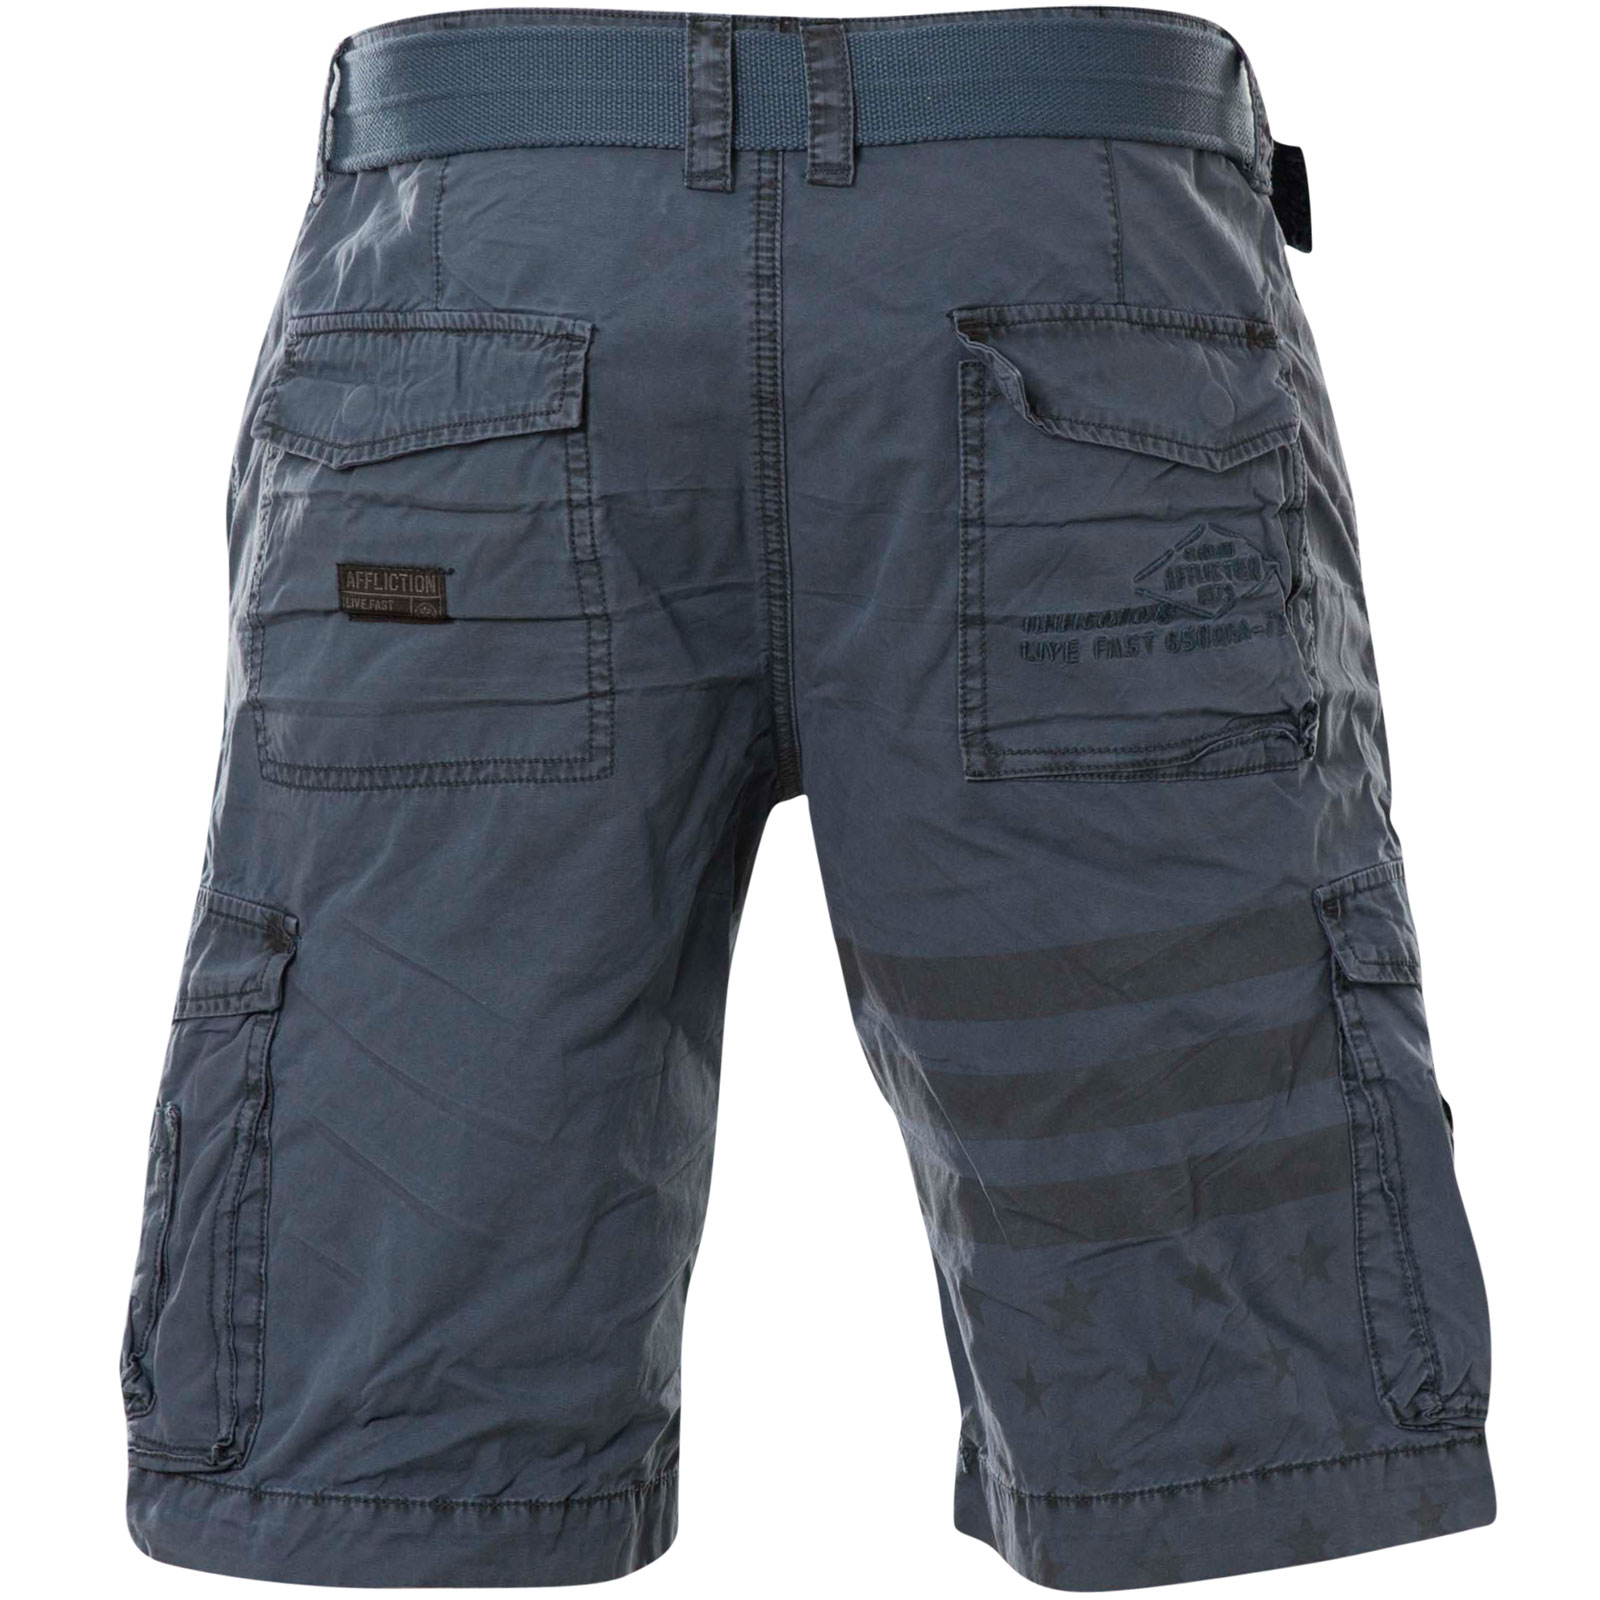 Affliction Norris Shorts with lots of embroidering, print with stars ...